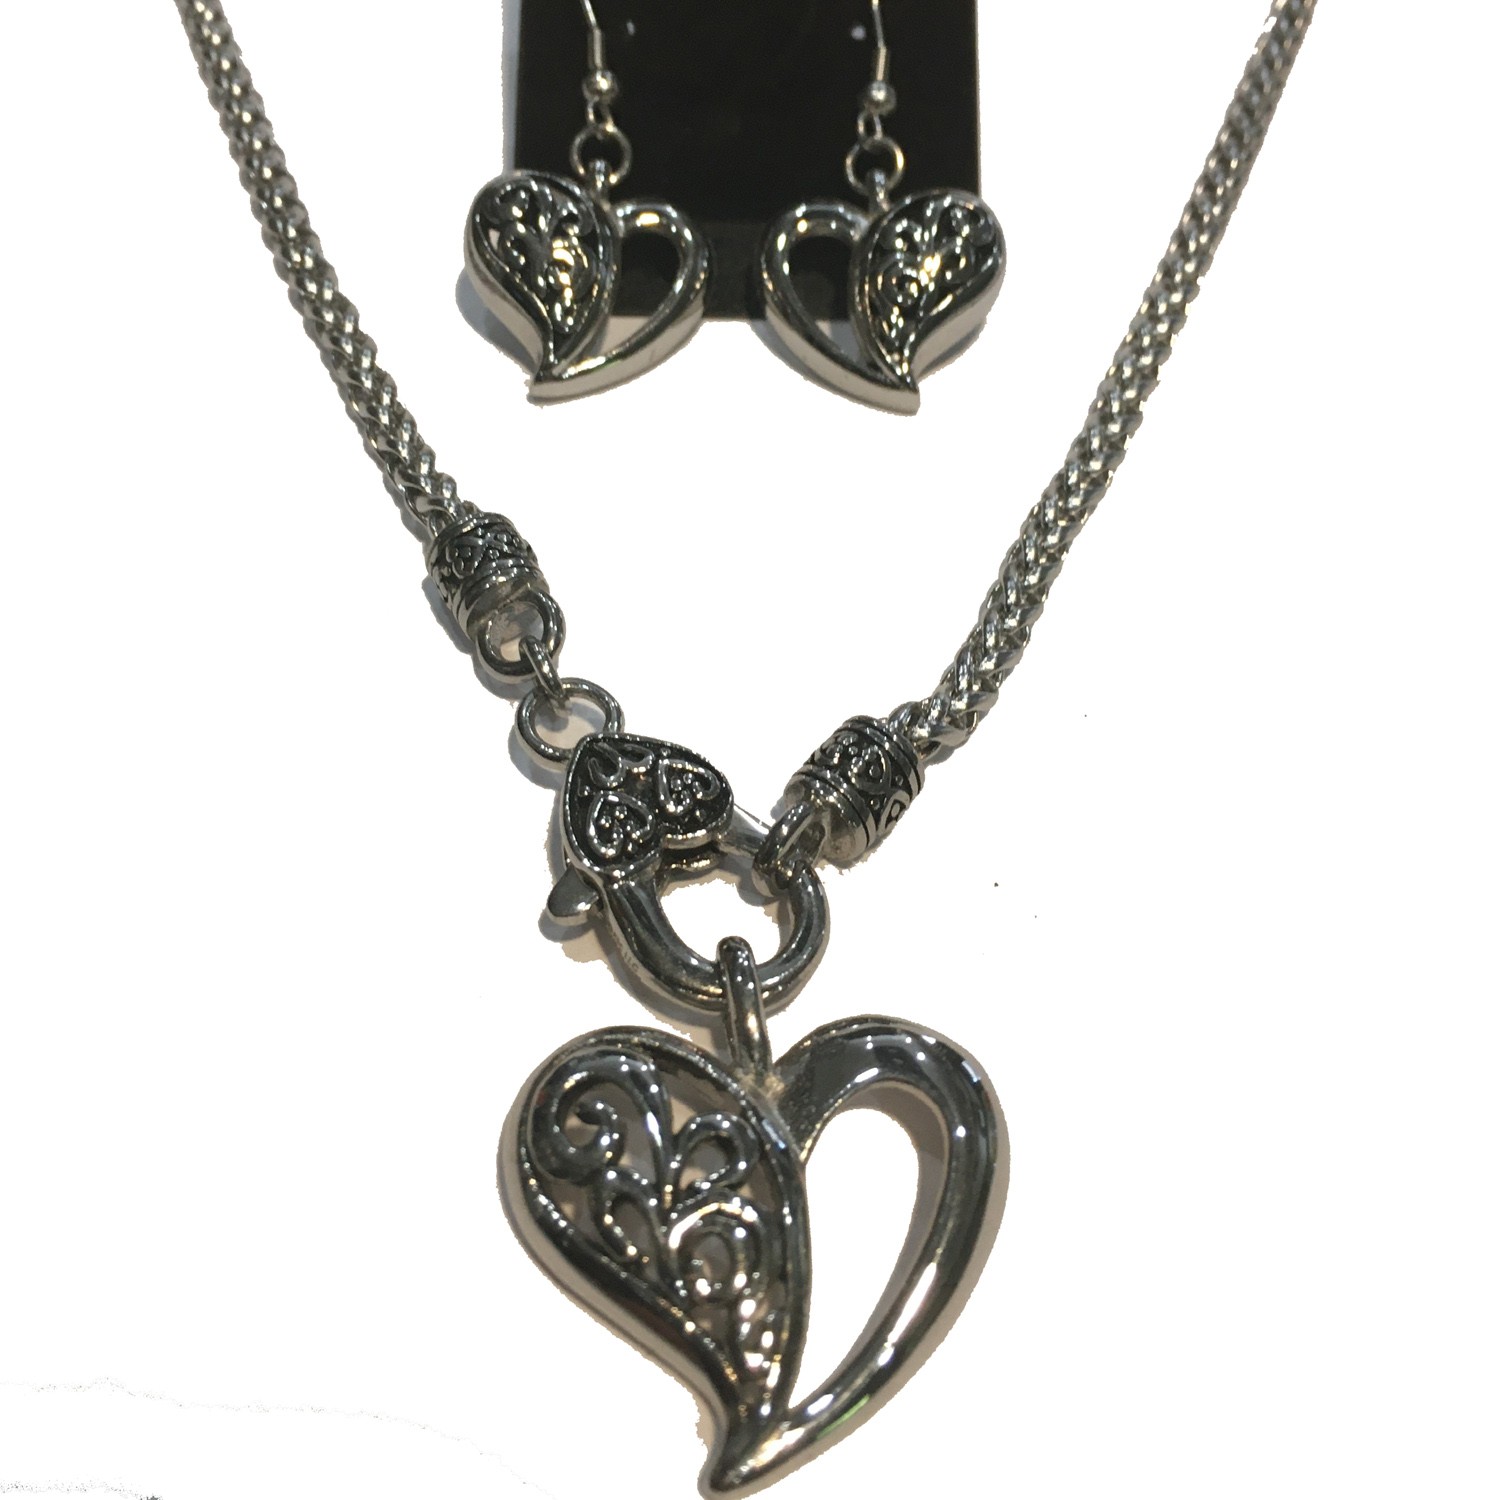 HEART ANTIQUE LOOK FILIGREE PENDANT ON CHAIN WITH HEART CLASP AND MATCHING EARRINGS STAINLESS STEEL